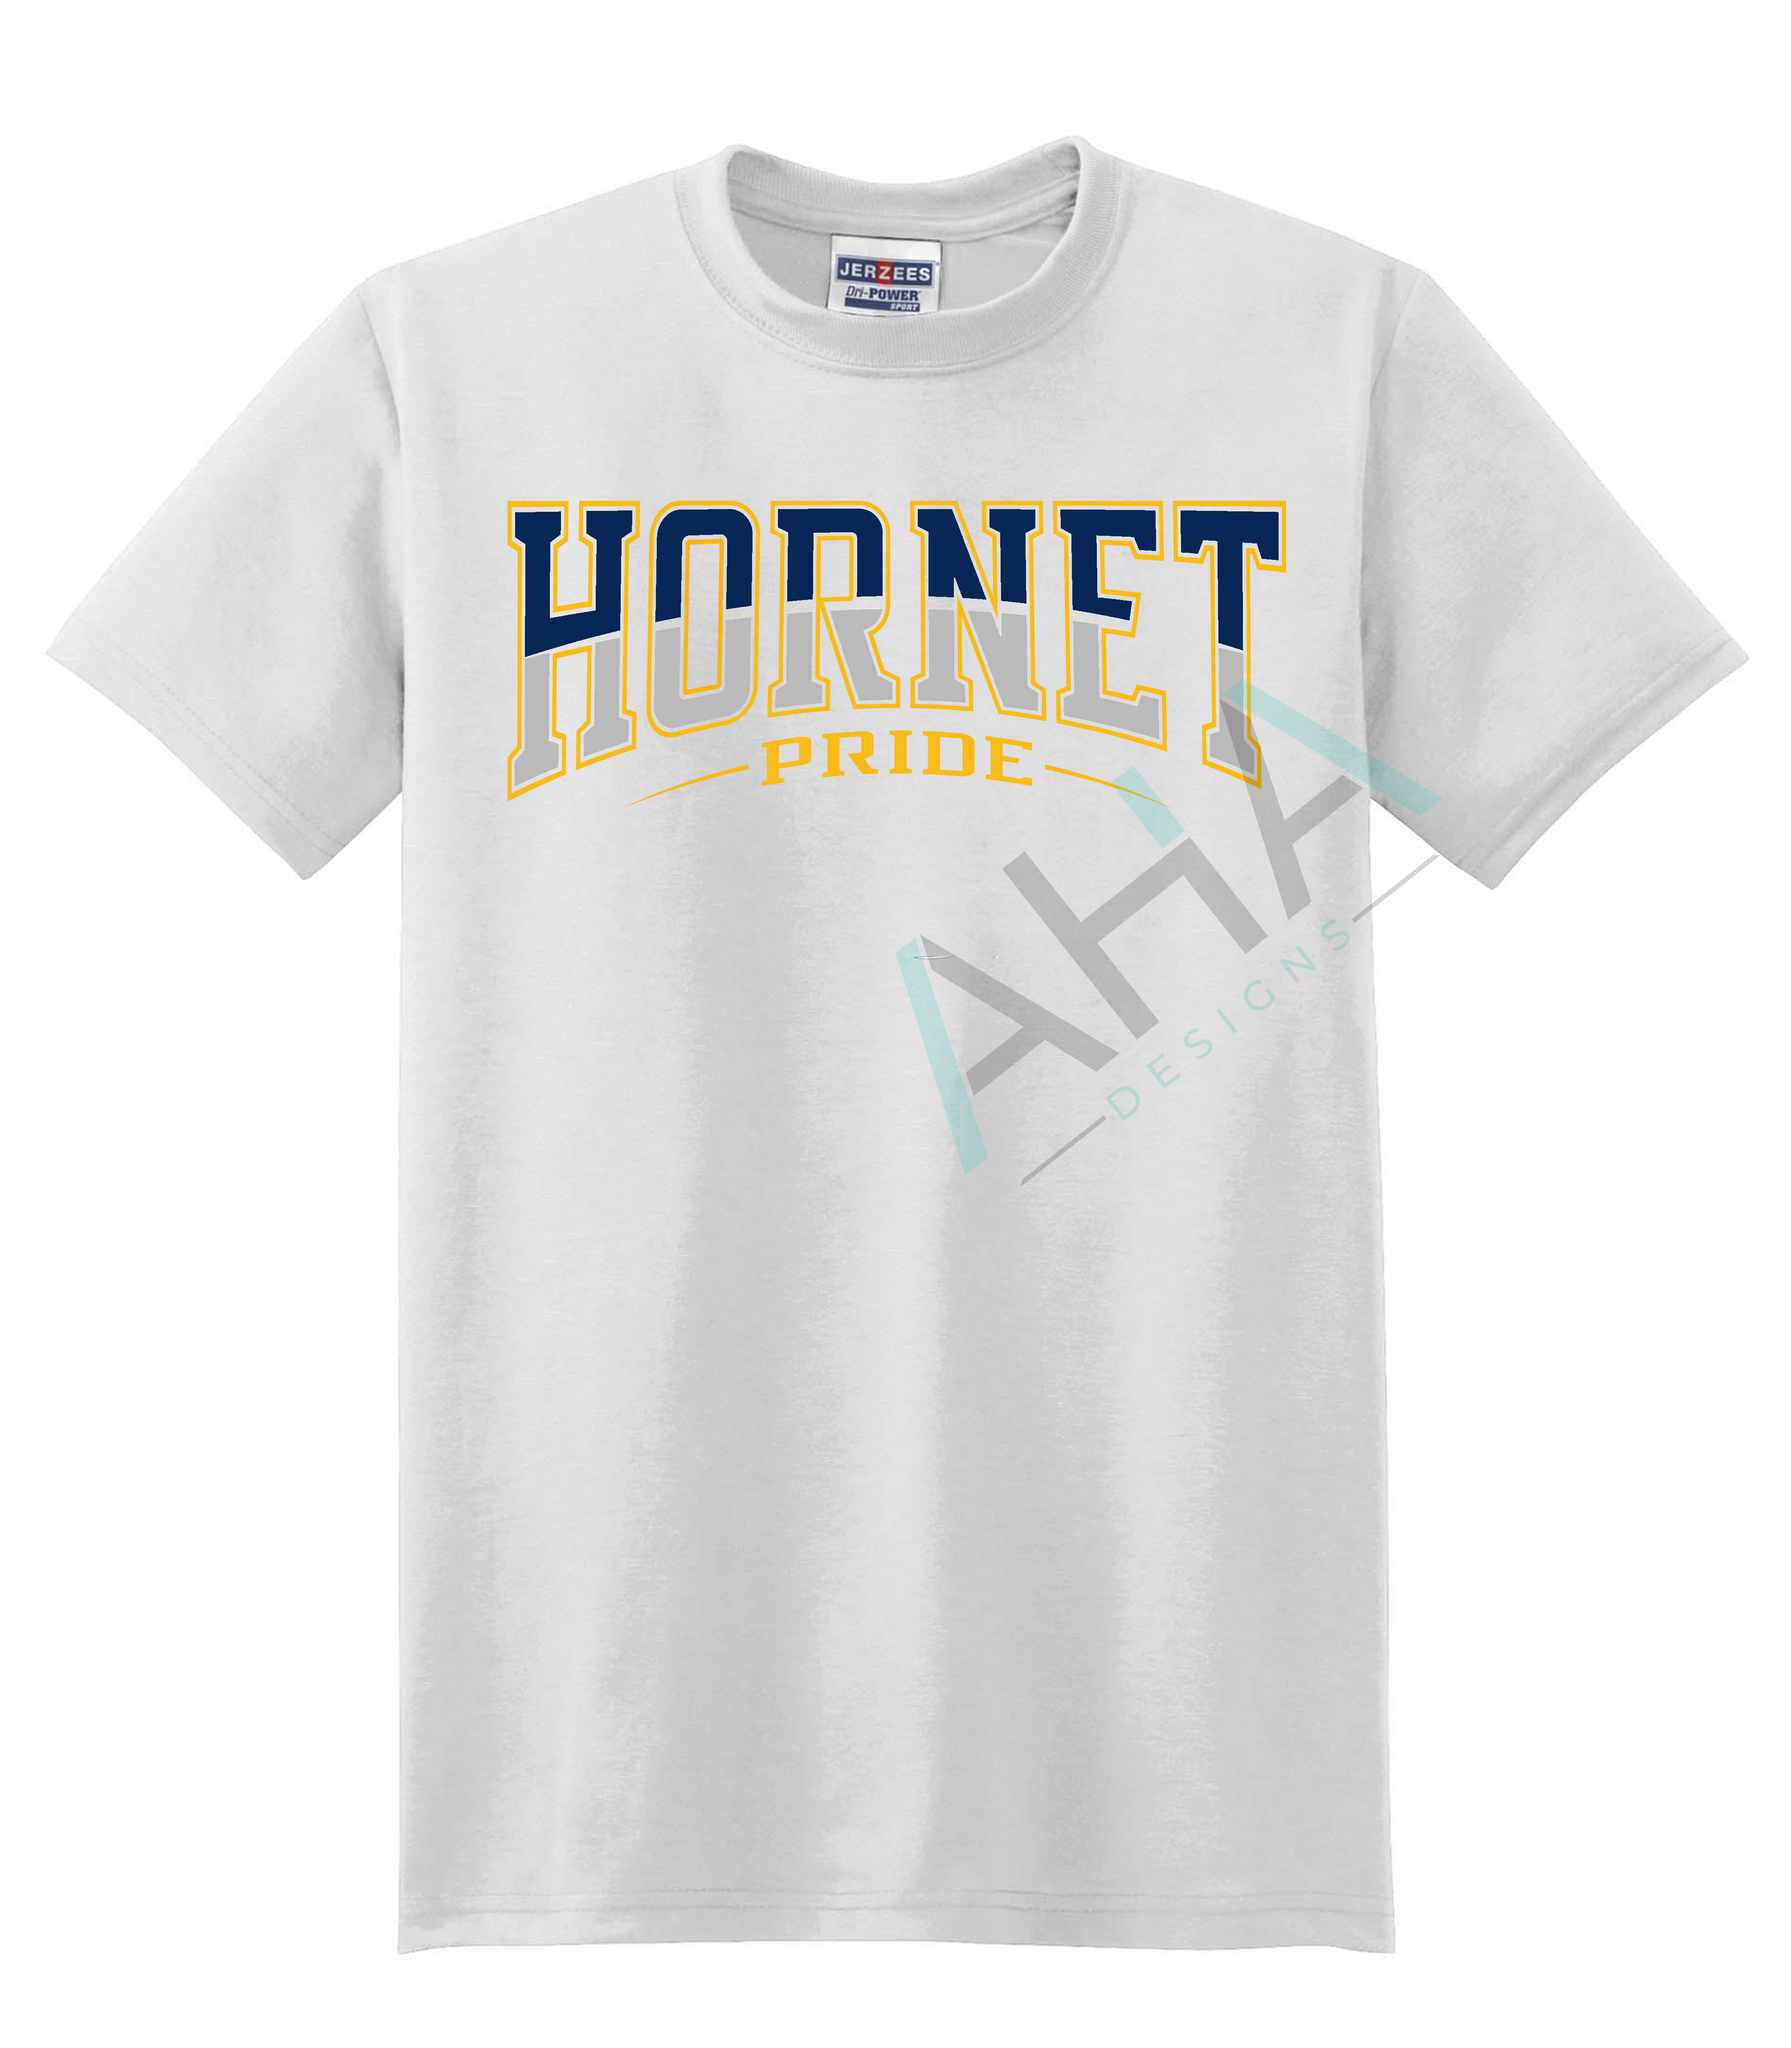 Hornet Pride White Tee with gray